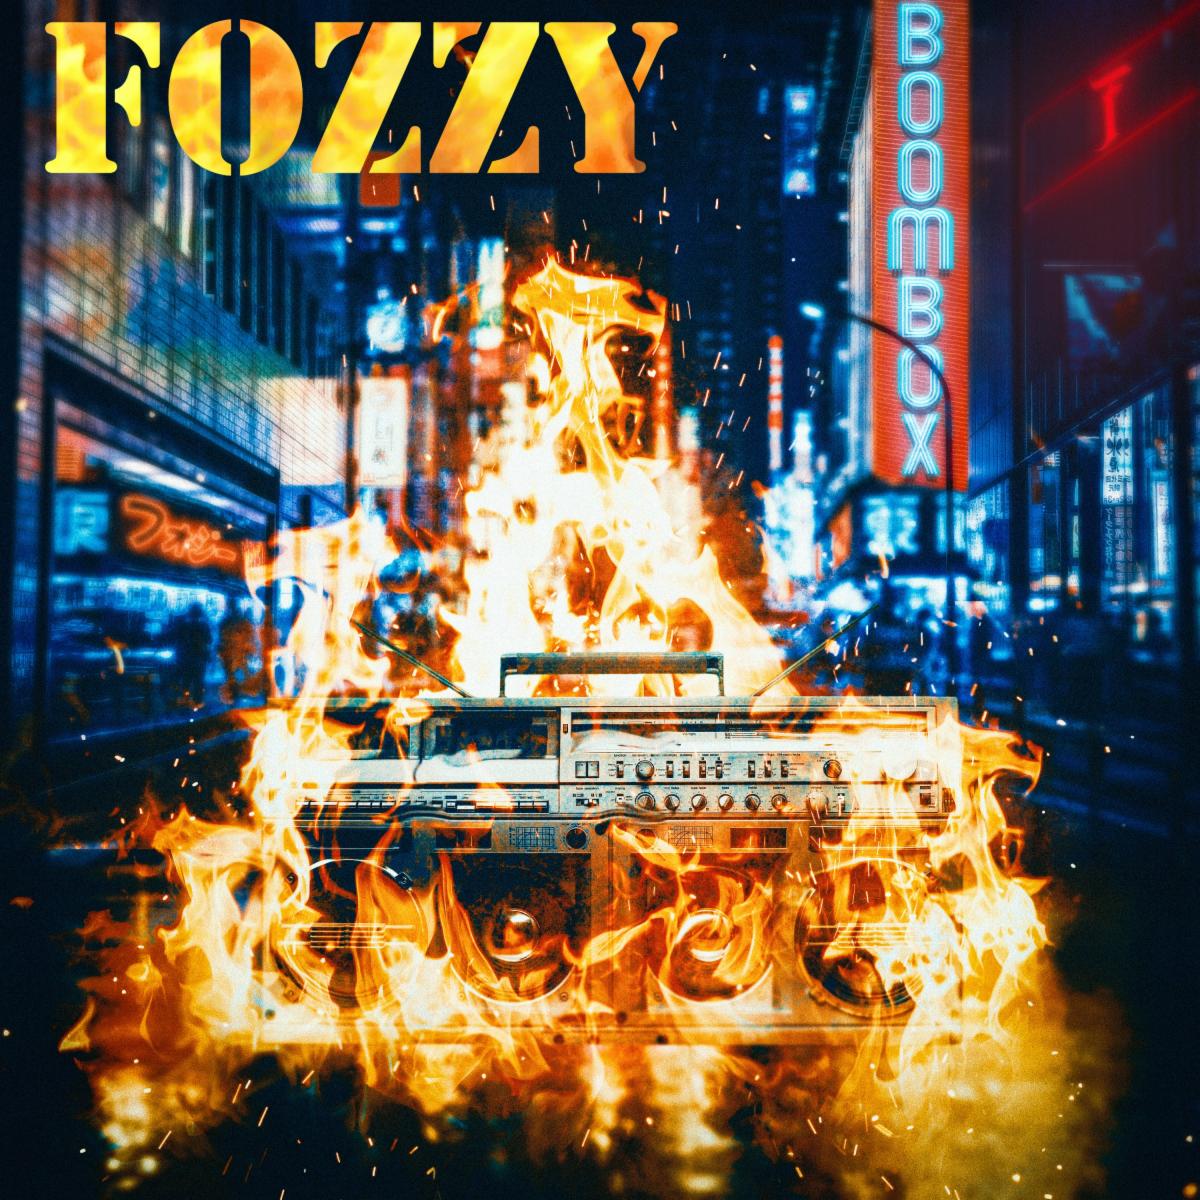 FOZZY Announces 20-Date U.S. and Canada Save The World Fall Tour